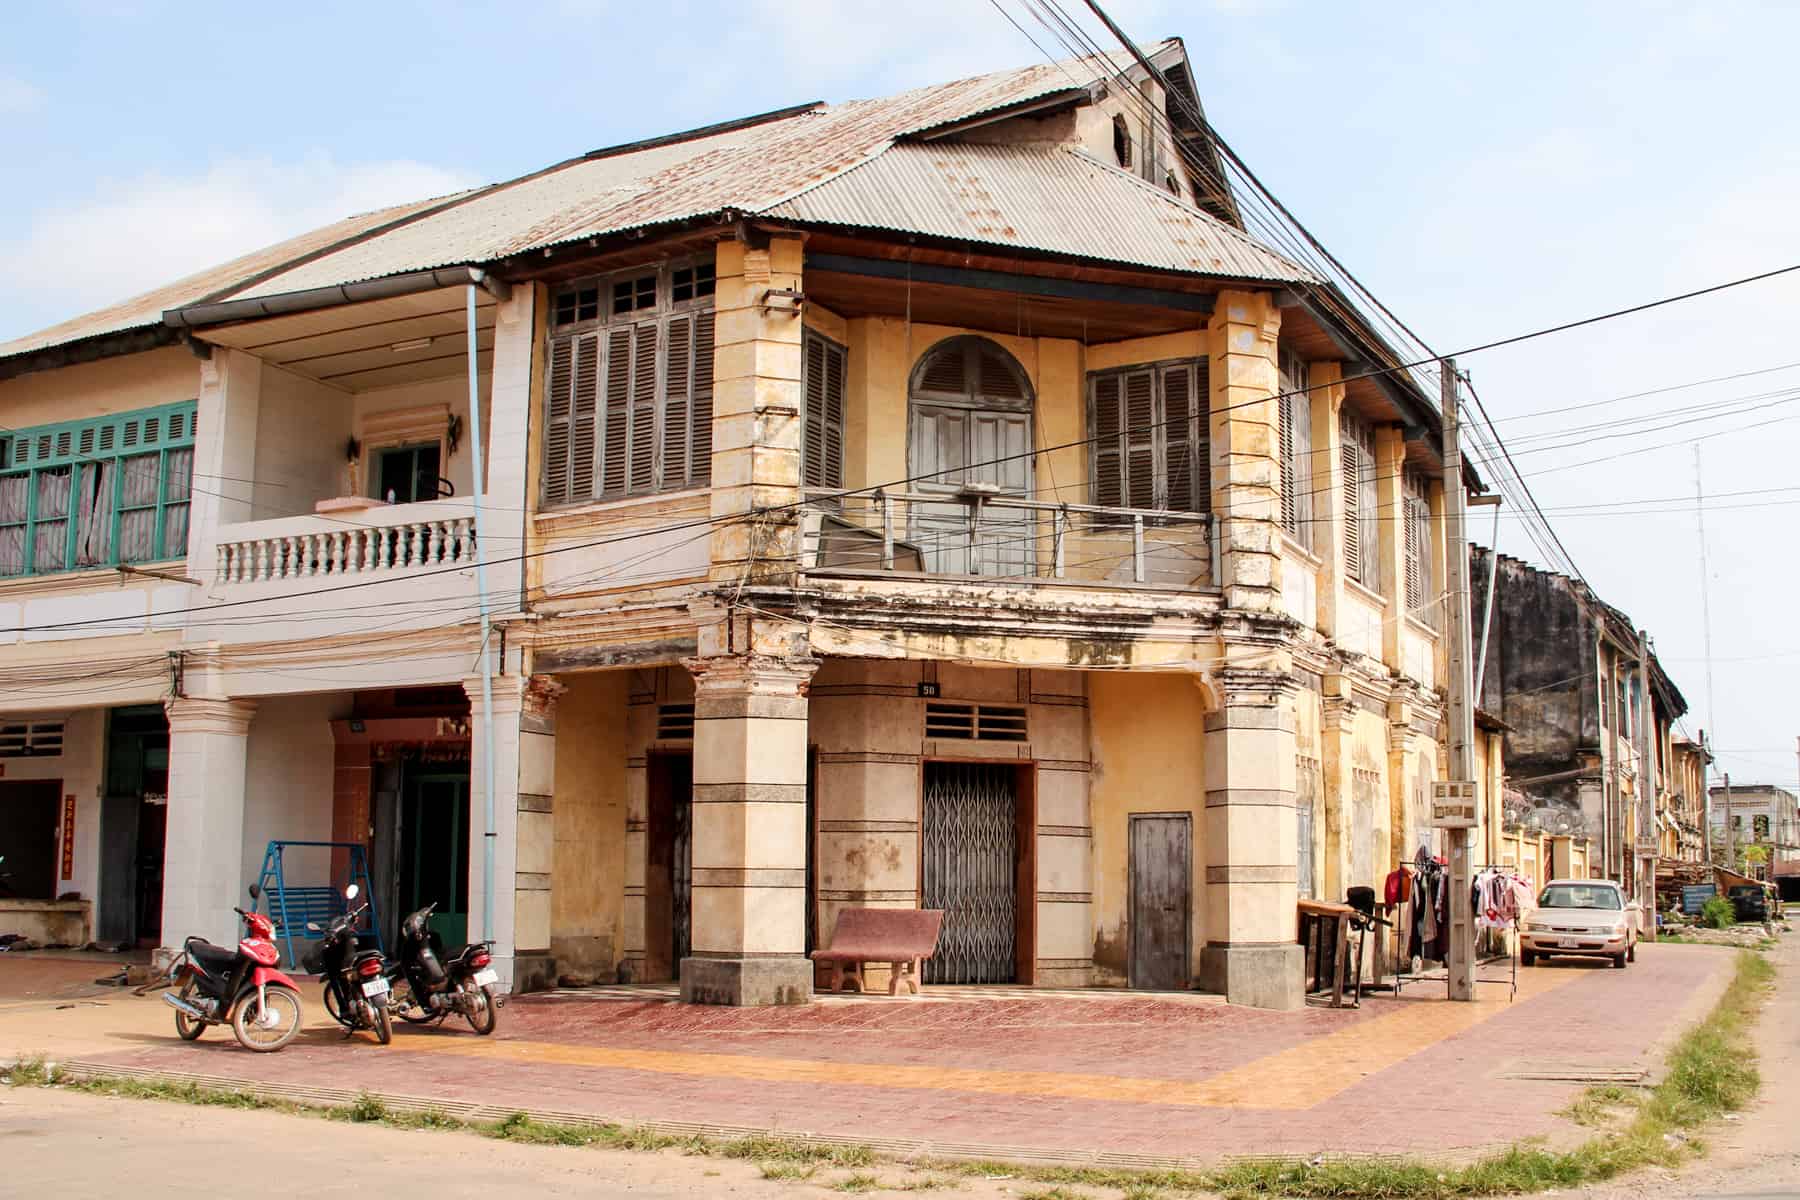 A faded yellow French colonial style mansion with wooden shutter windows, columns and a balcony on a street corner in Kampot city.